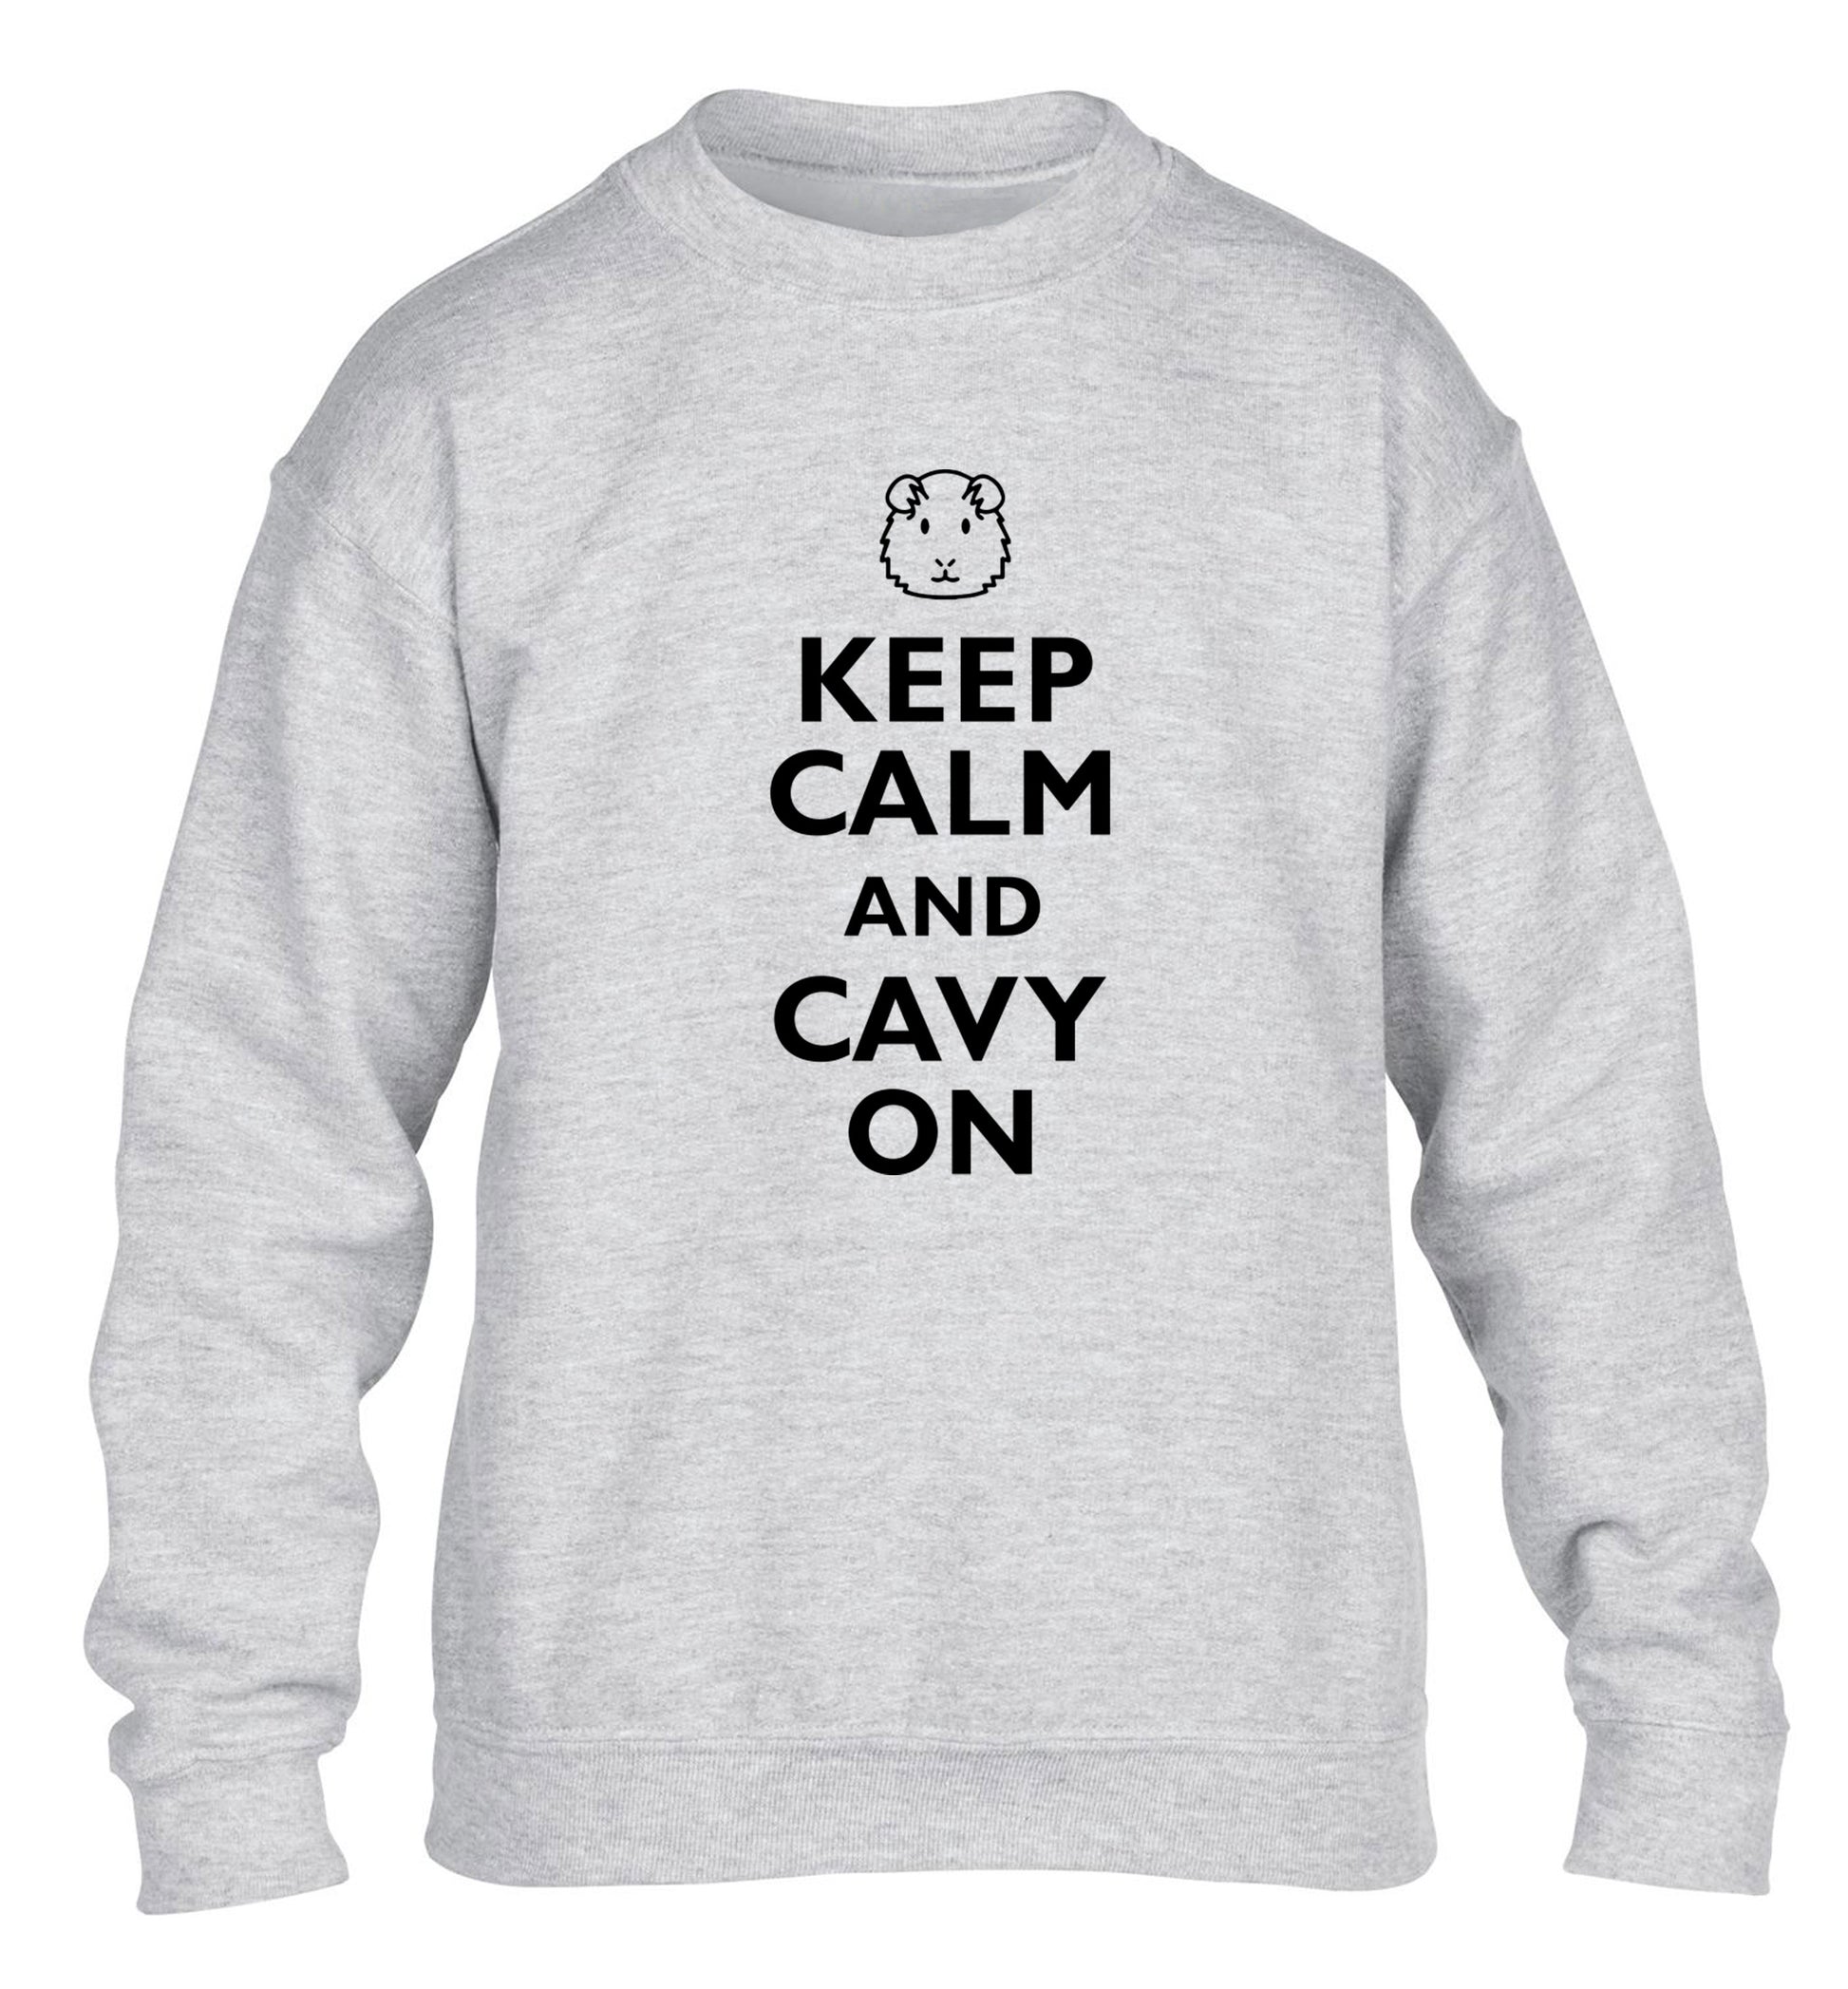 Keep calm and cavvy on children's grey  sweater 12-14 Years